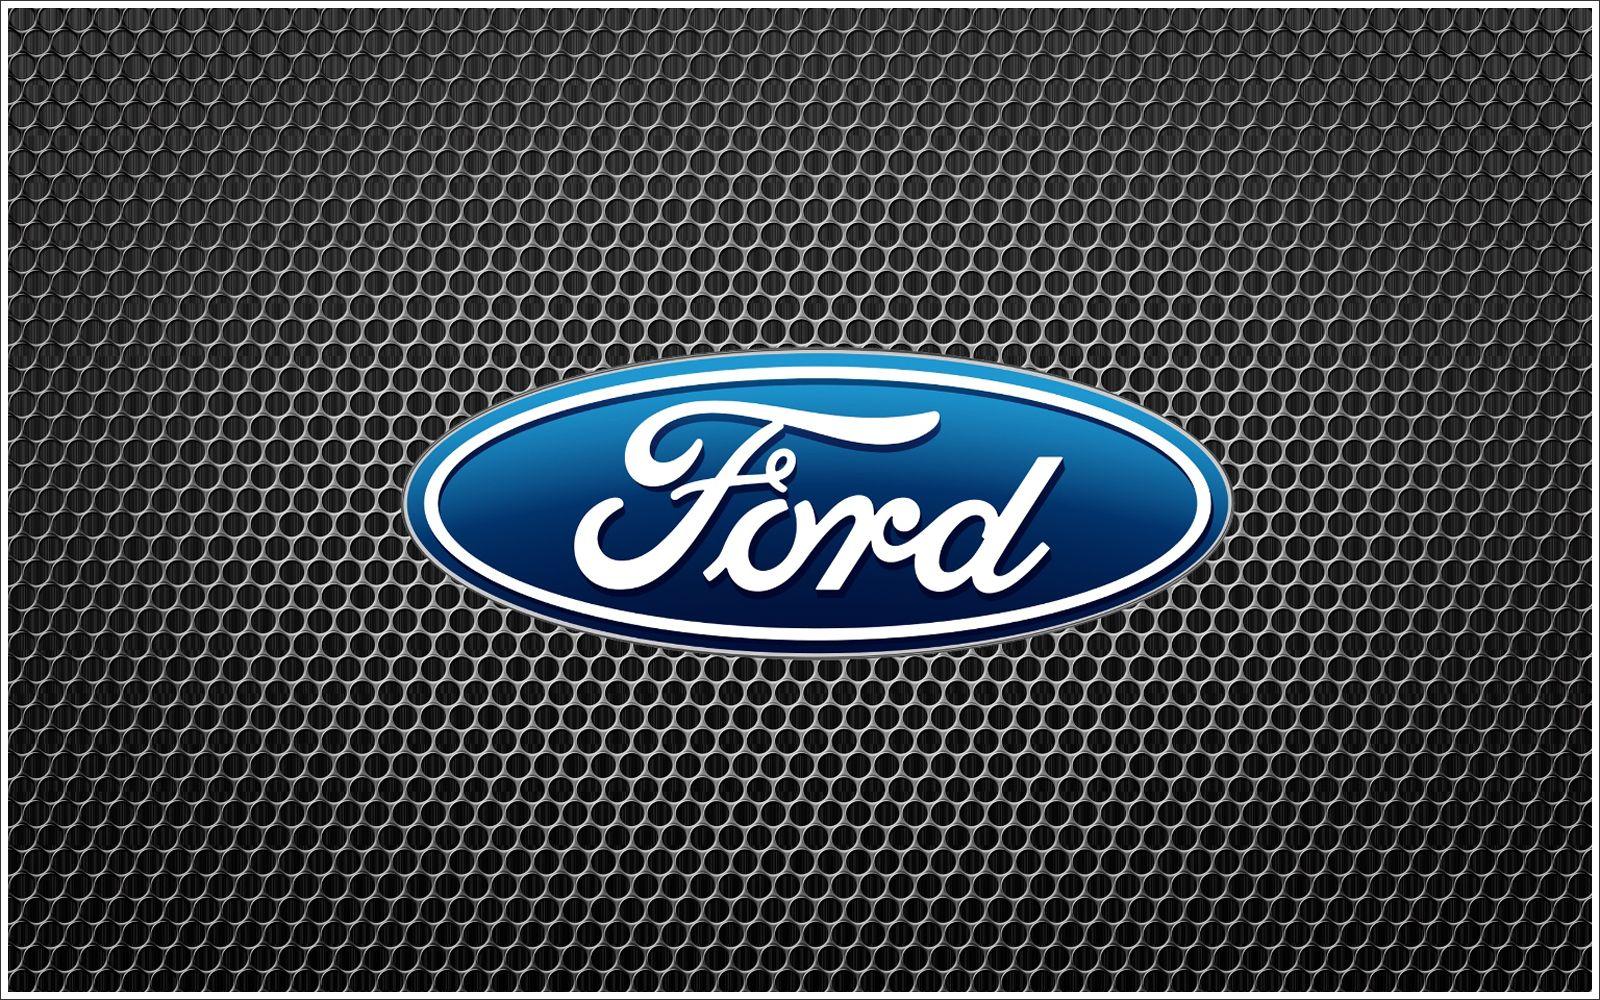 Ford Oval Logo - Ford Logo Meaning and History, latest models | World Cars Brands